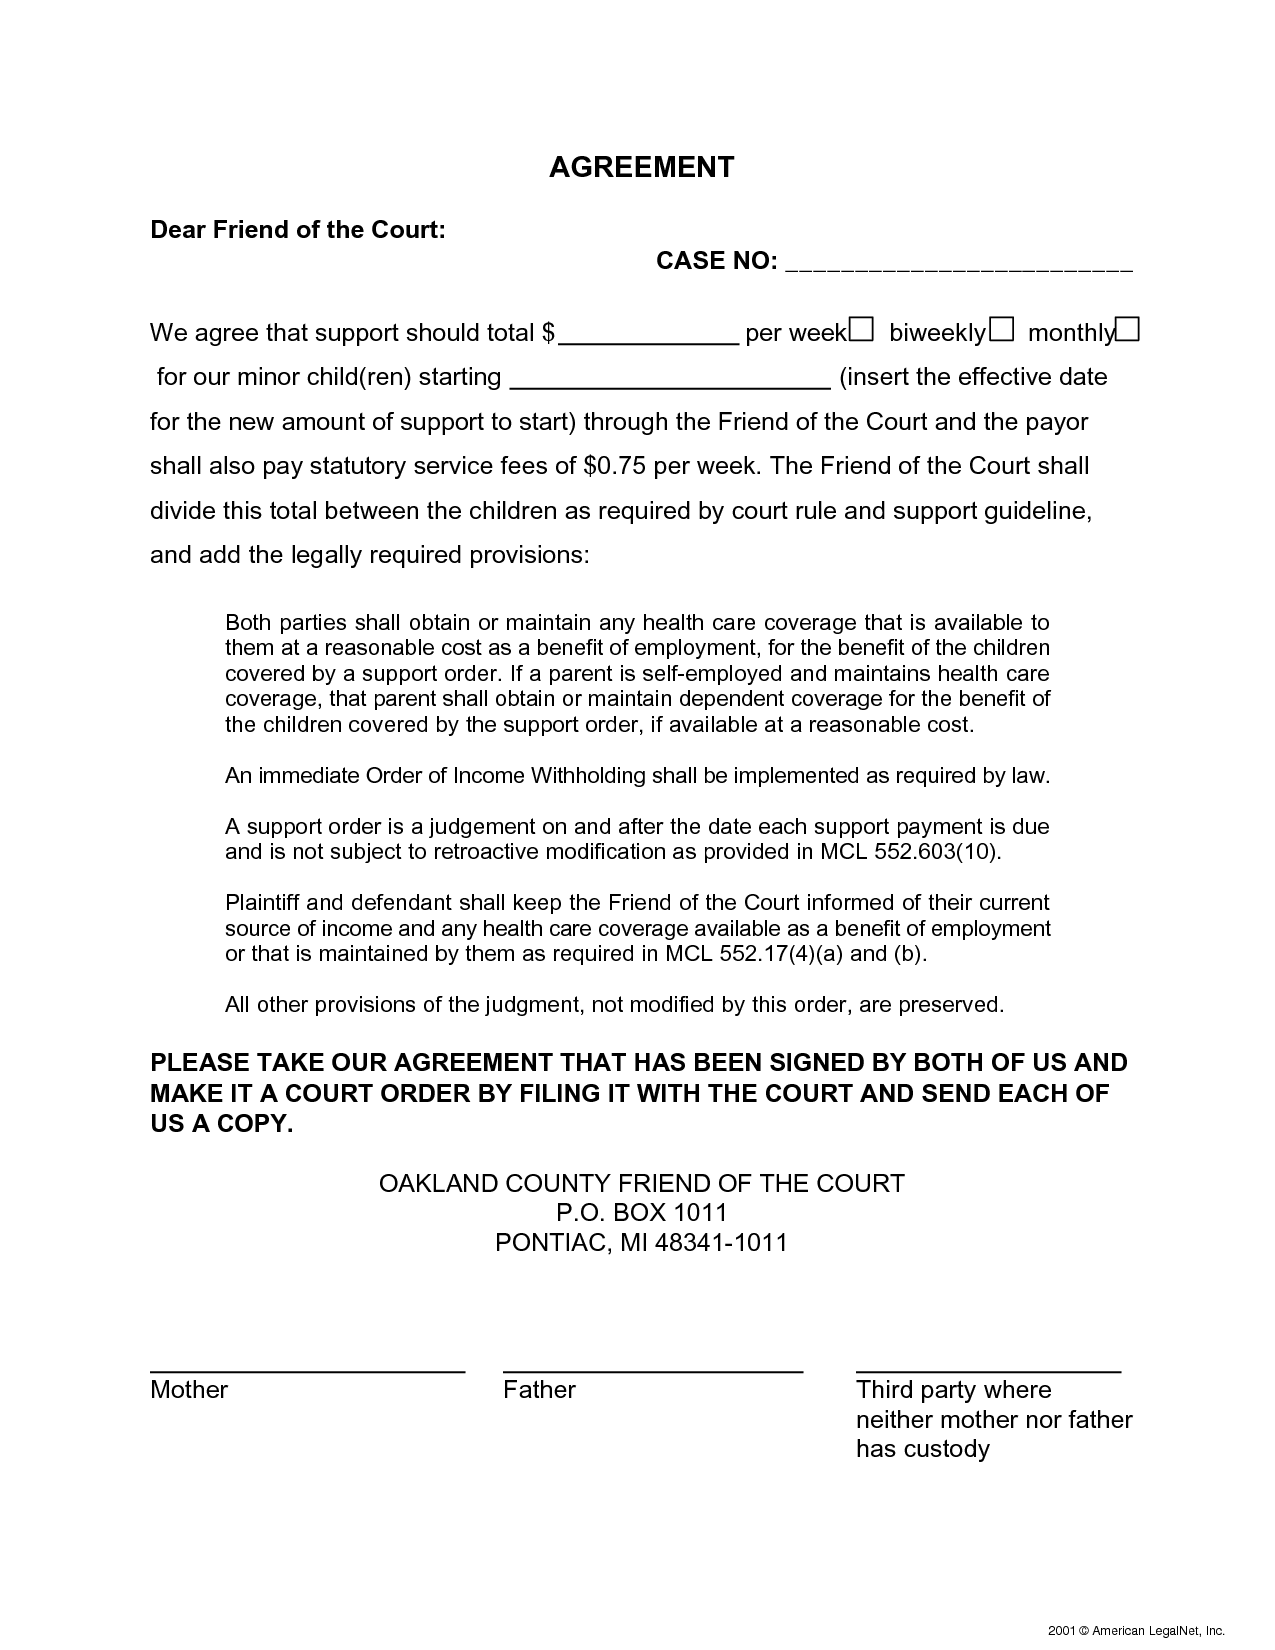 sample-child-support-agreement-free-printable-documents